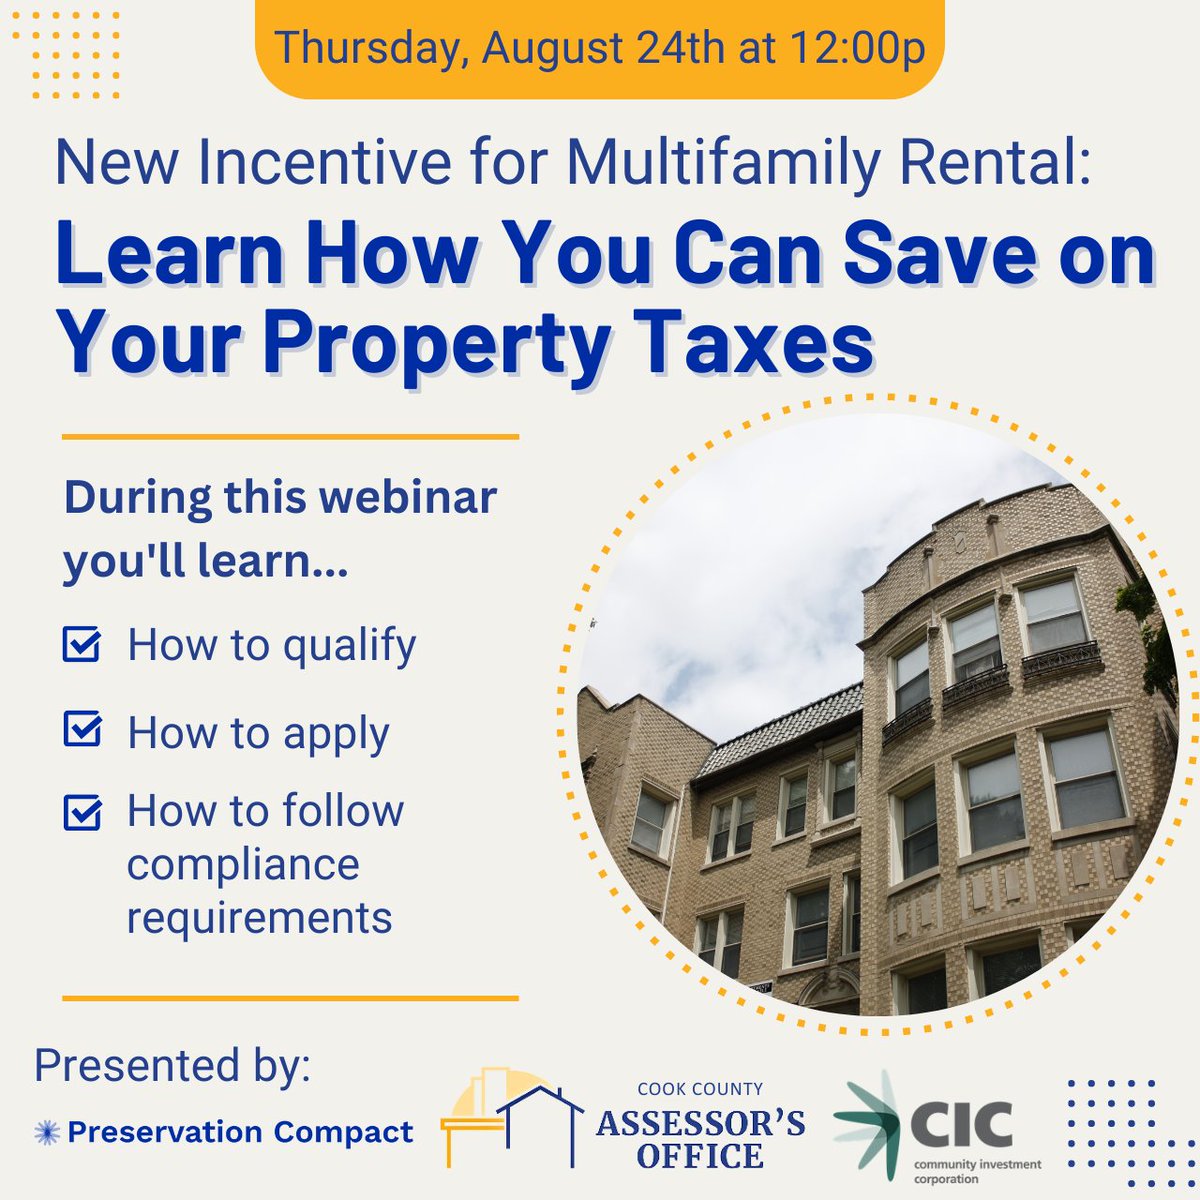 Join the us, @cicchicago and the @AssessorCook for a webinar all about the new multifamily property tax incentive on Thursday, August 24th at 12:00p! You'll learn how to qualify, how to apply, and how to comply with the requirements of the program! cicchicago.zoom.us/webinar/regist…